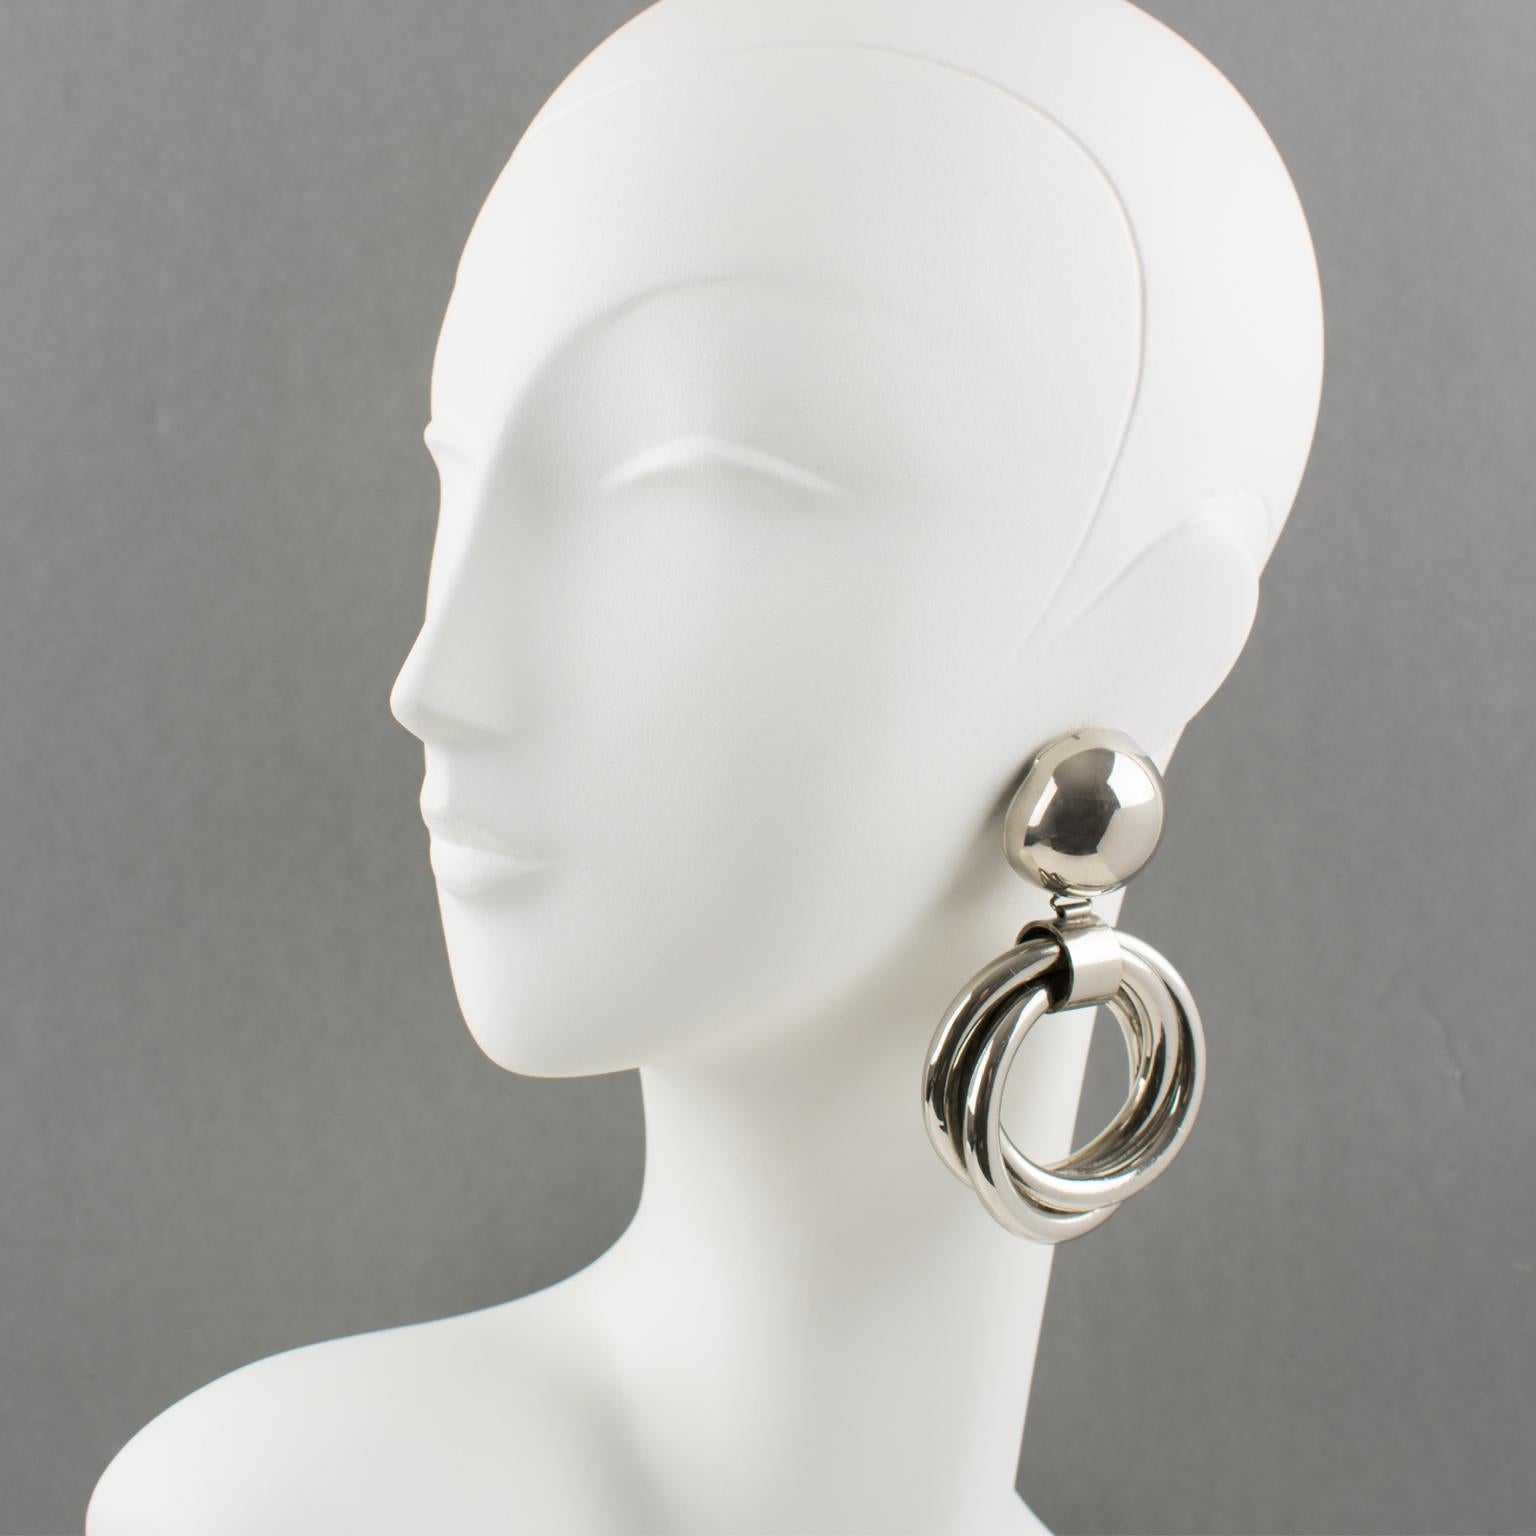 These stunning sculptural chrome metal clip-on earrings feature a geometric modernist dimensional dangling shape with a bold statement design. There is no visible maker's mark.
The earrings are in good condition, with a tiny bump on the side of the